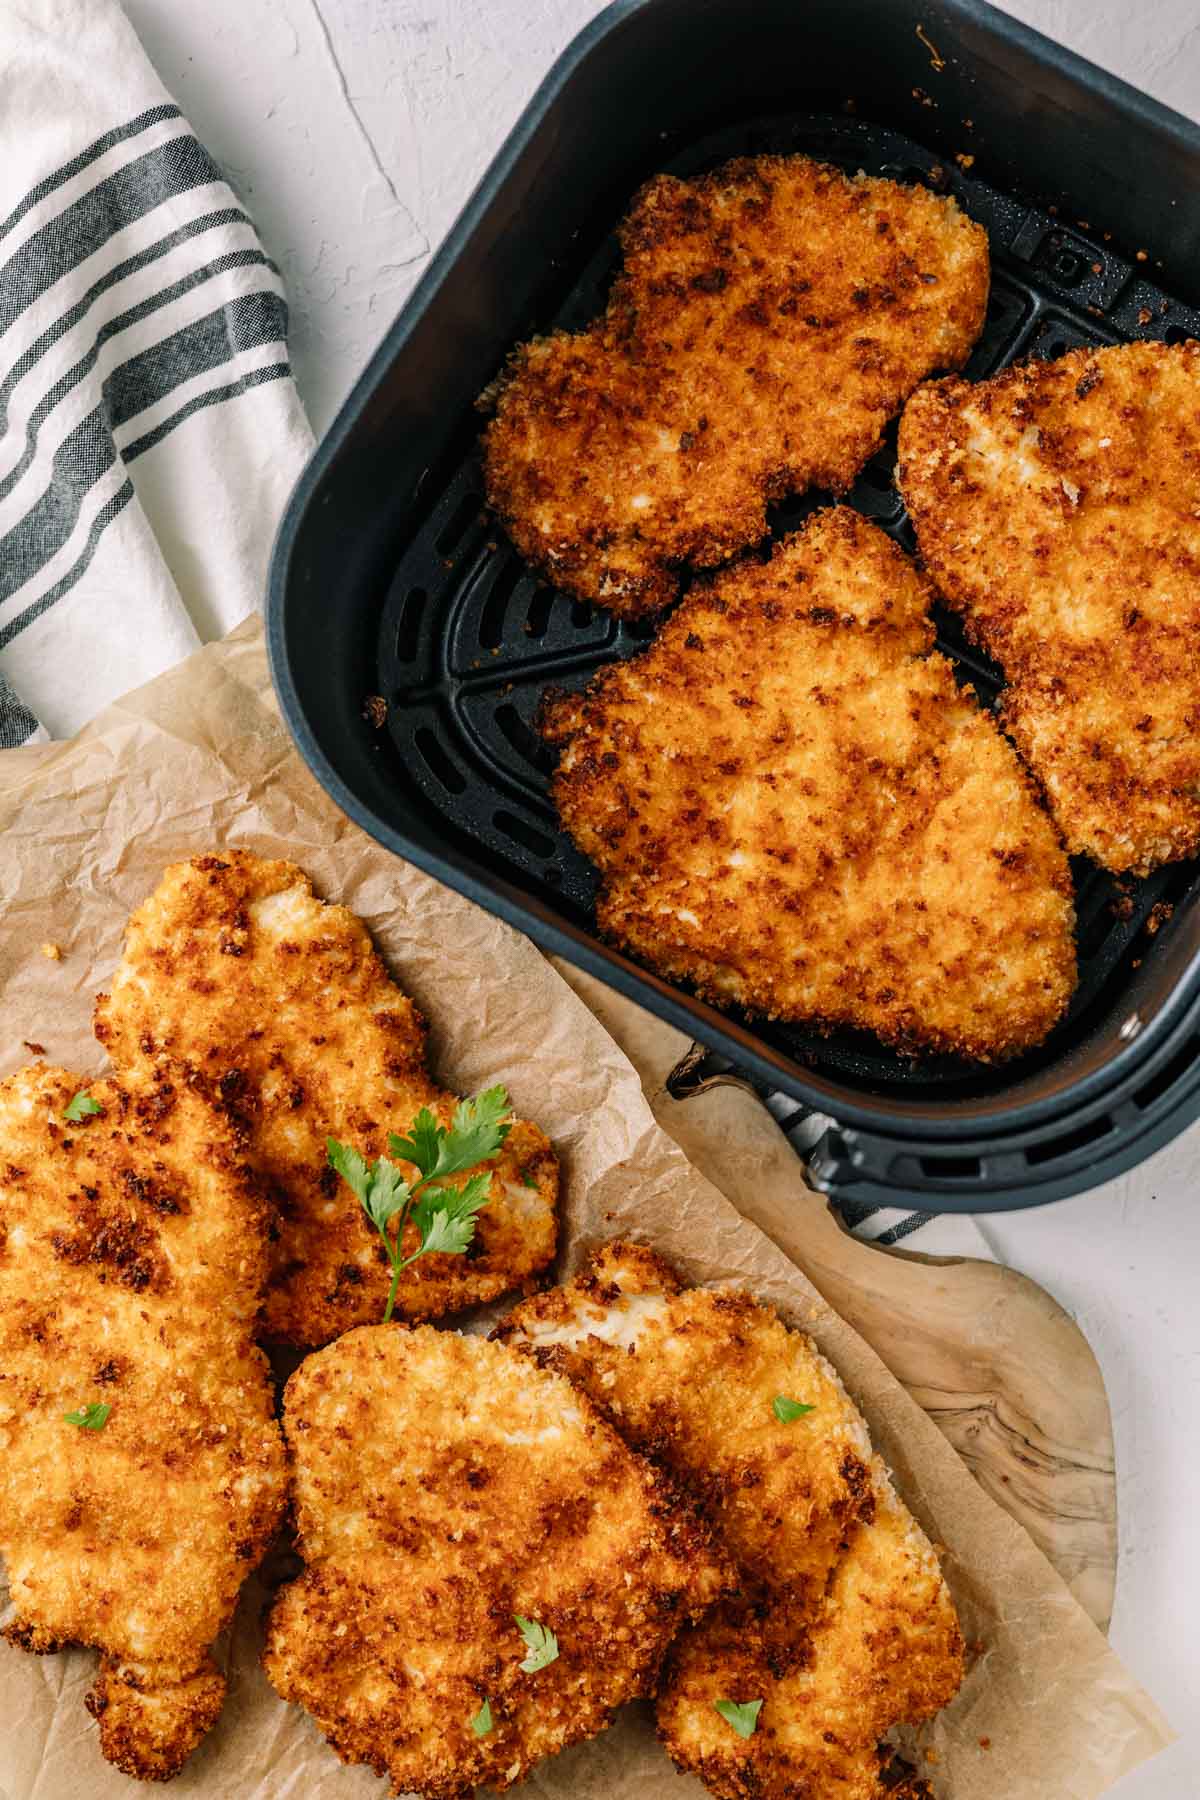 How Long To Cook Breaded Chicken In Air Fryer